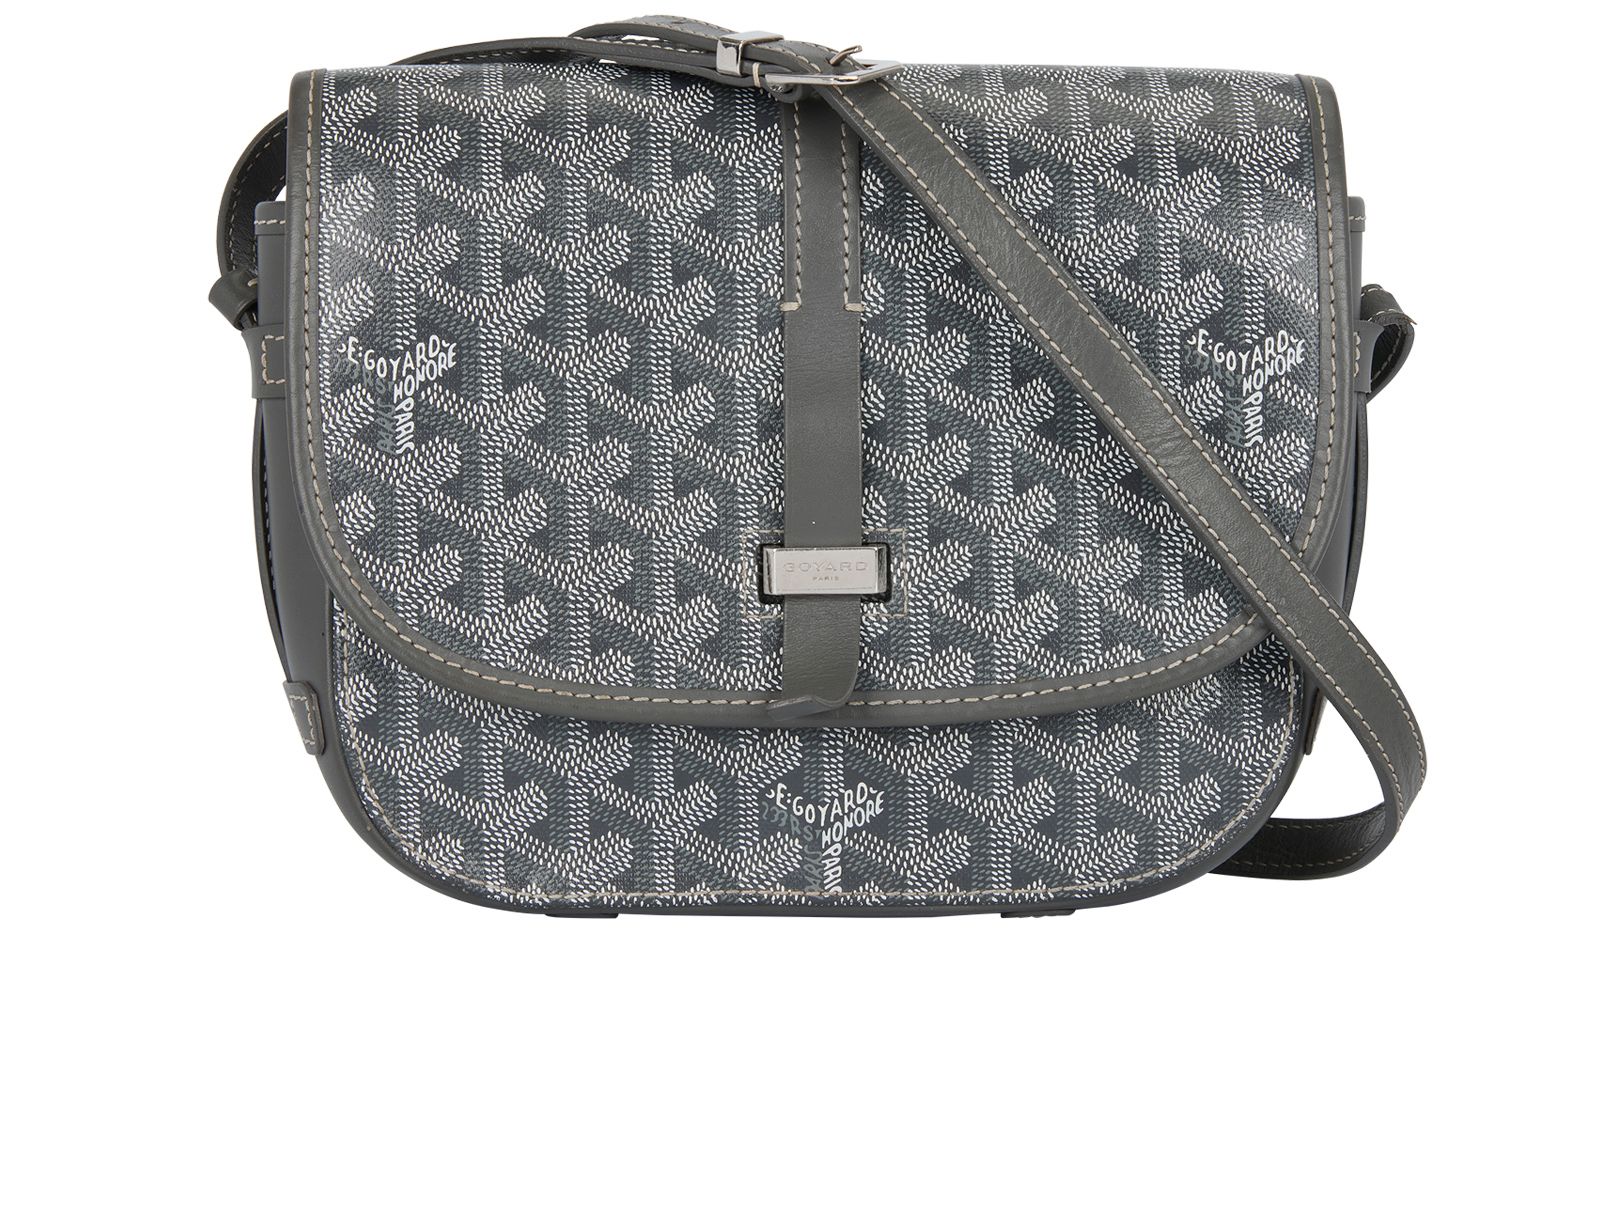 Goyard Belvedere White PM Bag Sourced & Sold Below RRP To One Of